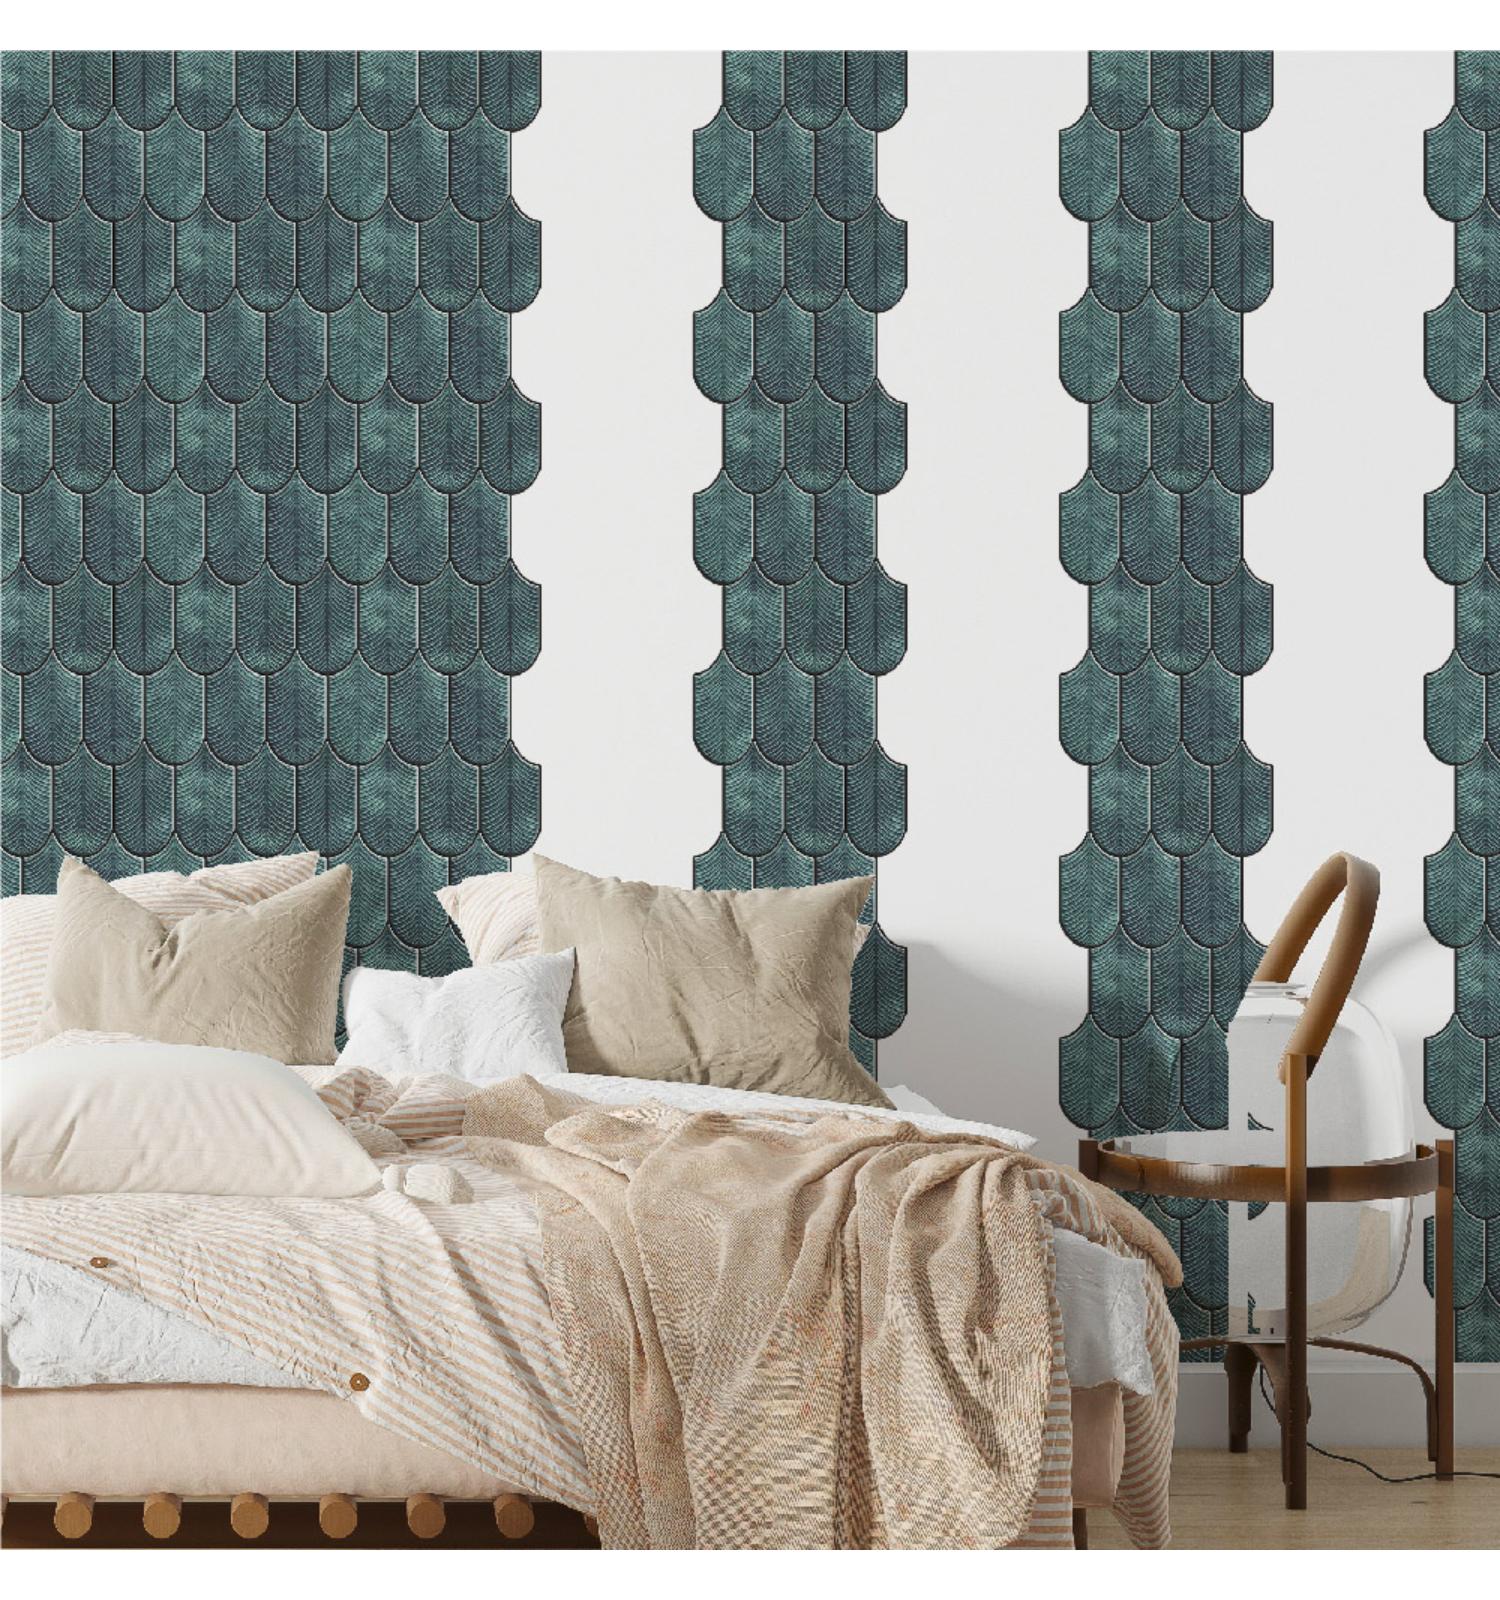 Teal Blue Peel And Stick Wall Tile | Kitchen Backsplash Self Adhesive Tiles For Home Décor